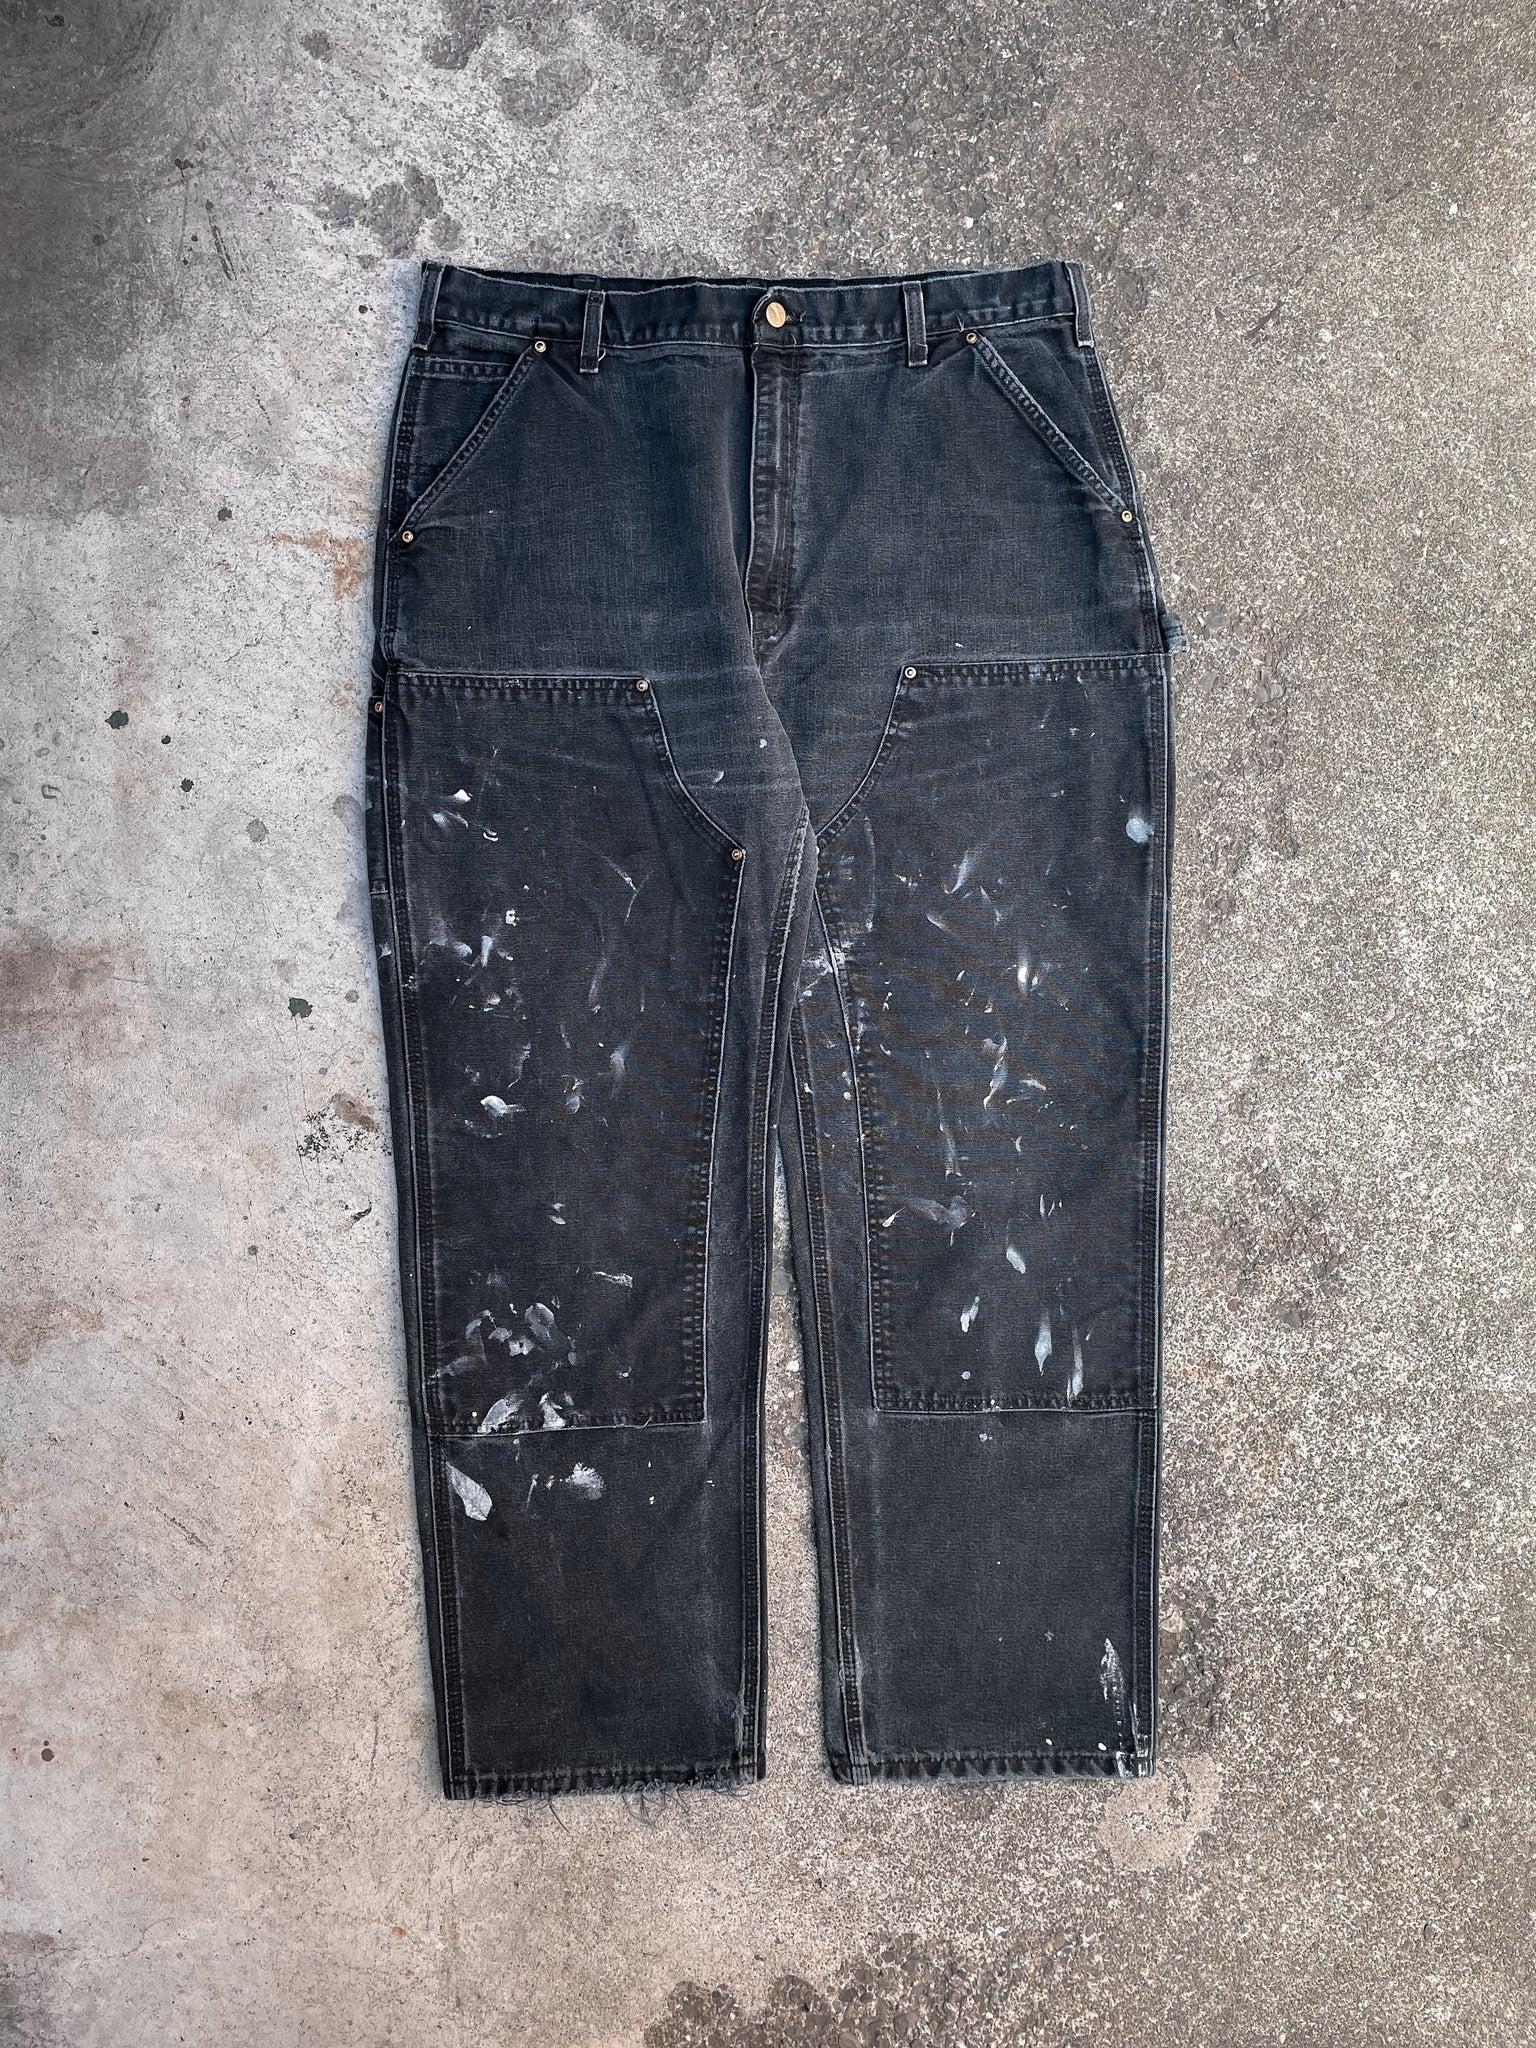 Carhartt B01 Repaired Painted Black Double Front Knee Work